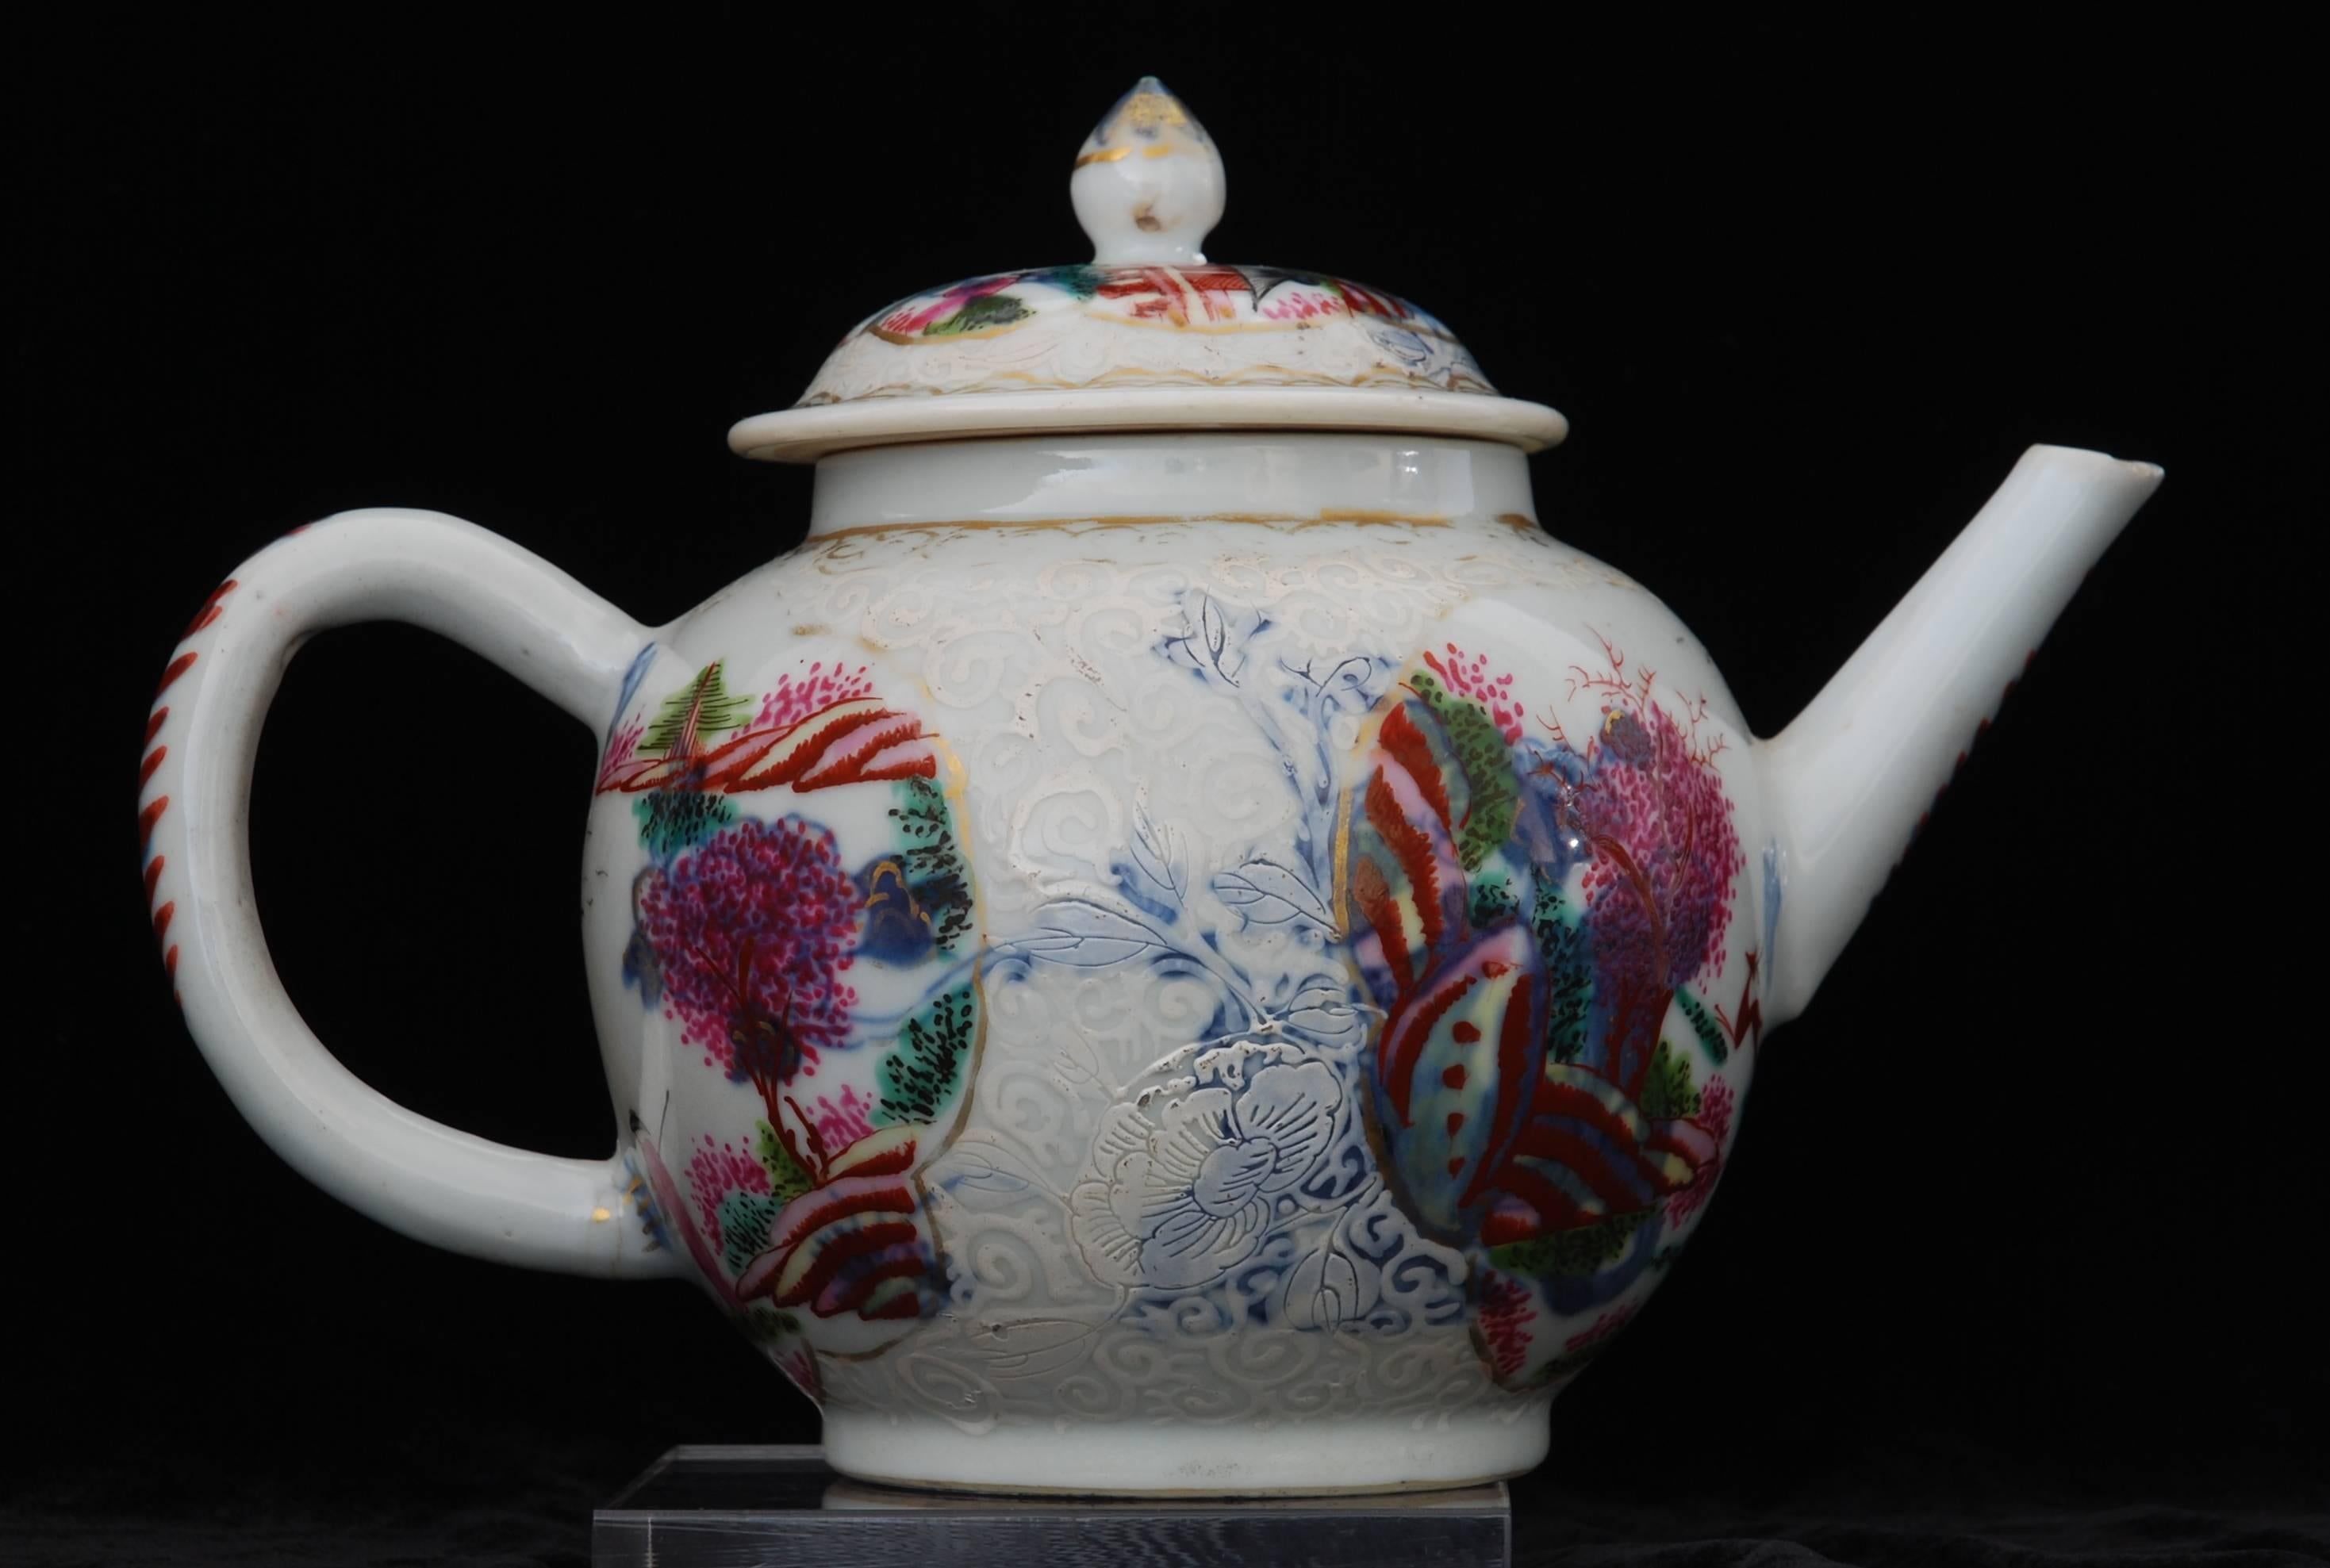 Teapot, Stag Hunt Pattern, China, circa 1740, Decorated in London by Giles In Good Condition For Sale In Melbourne, Victoria